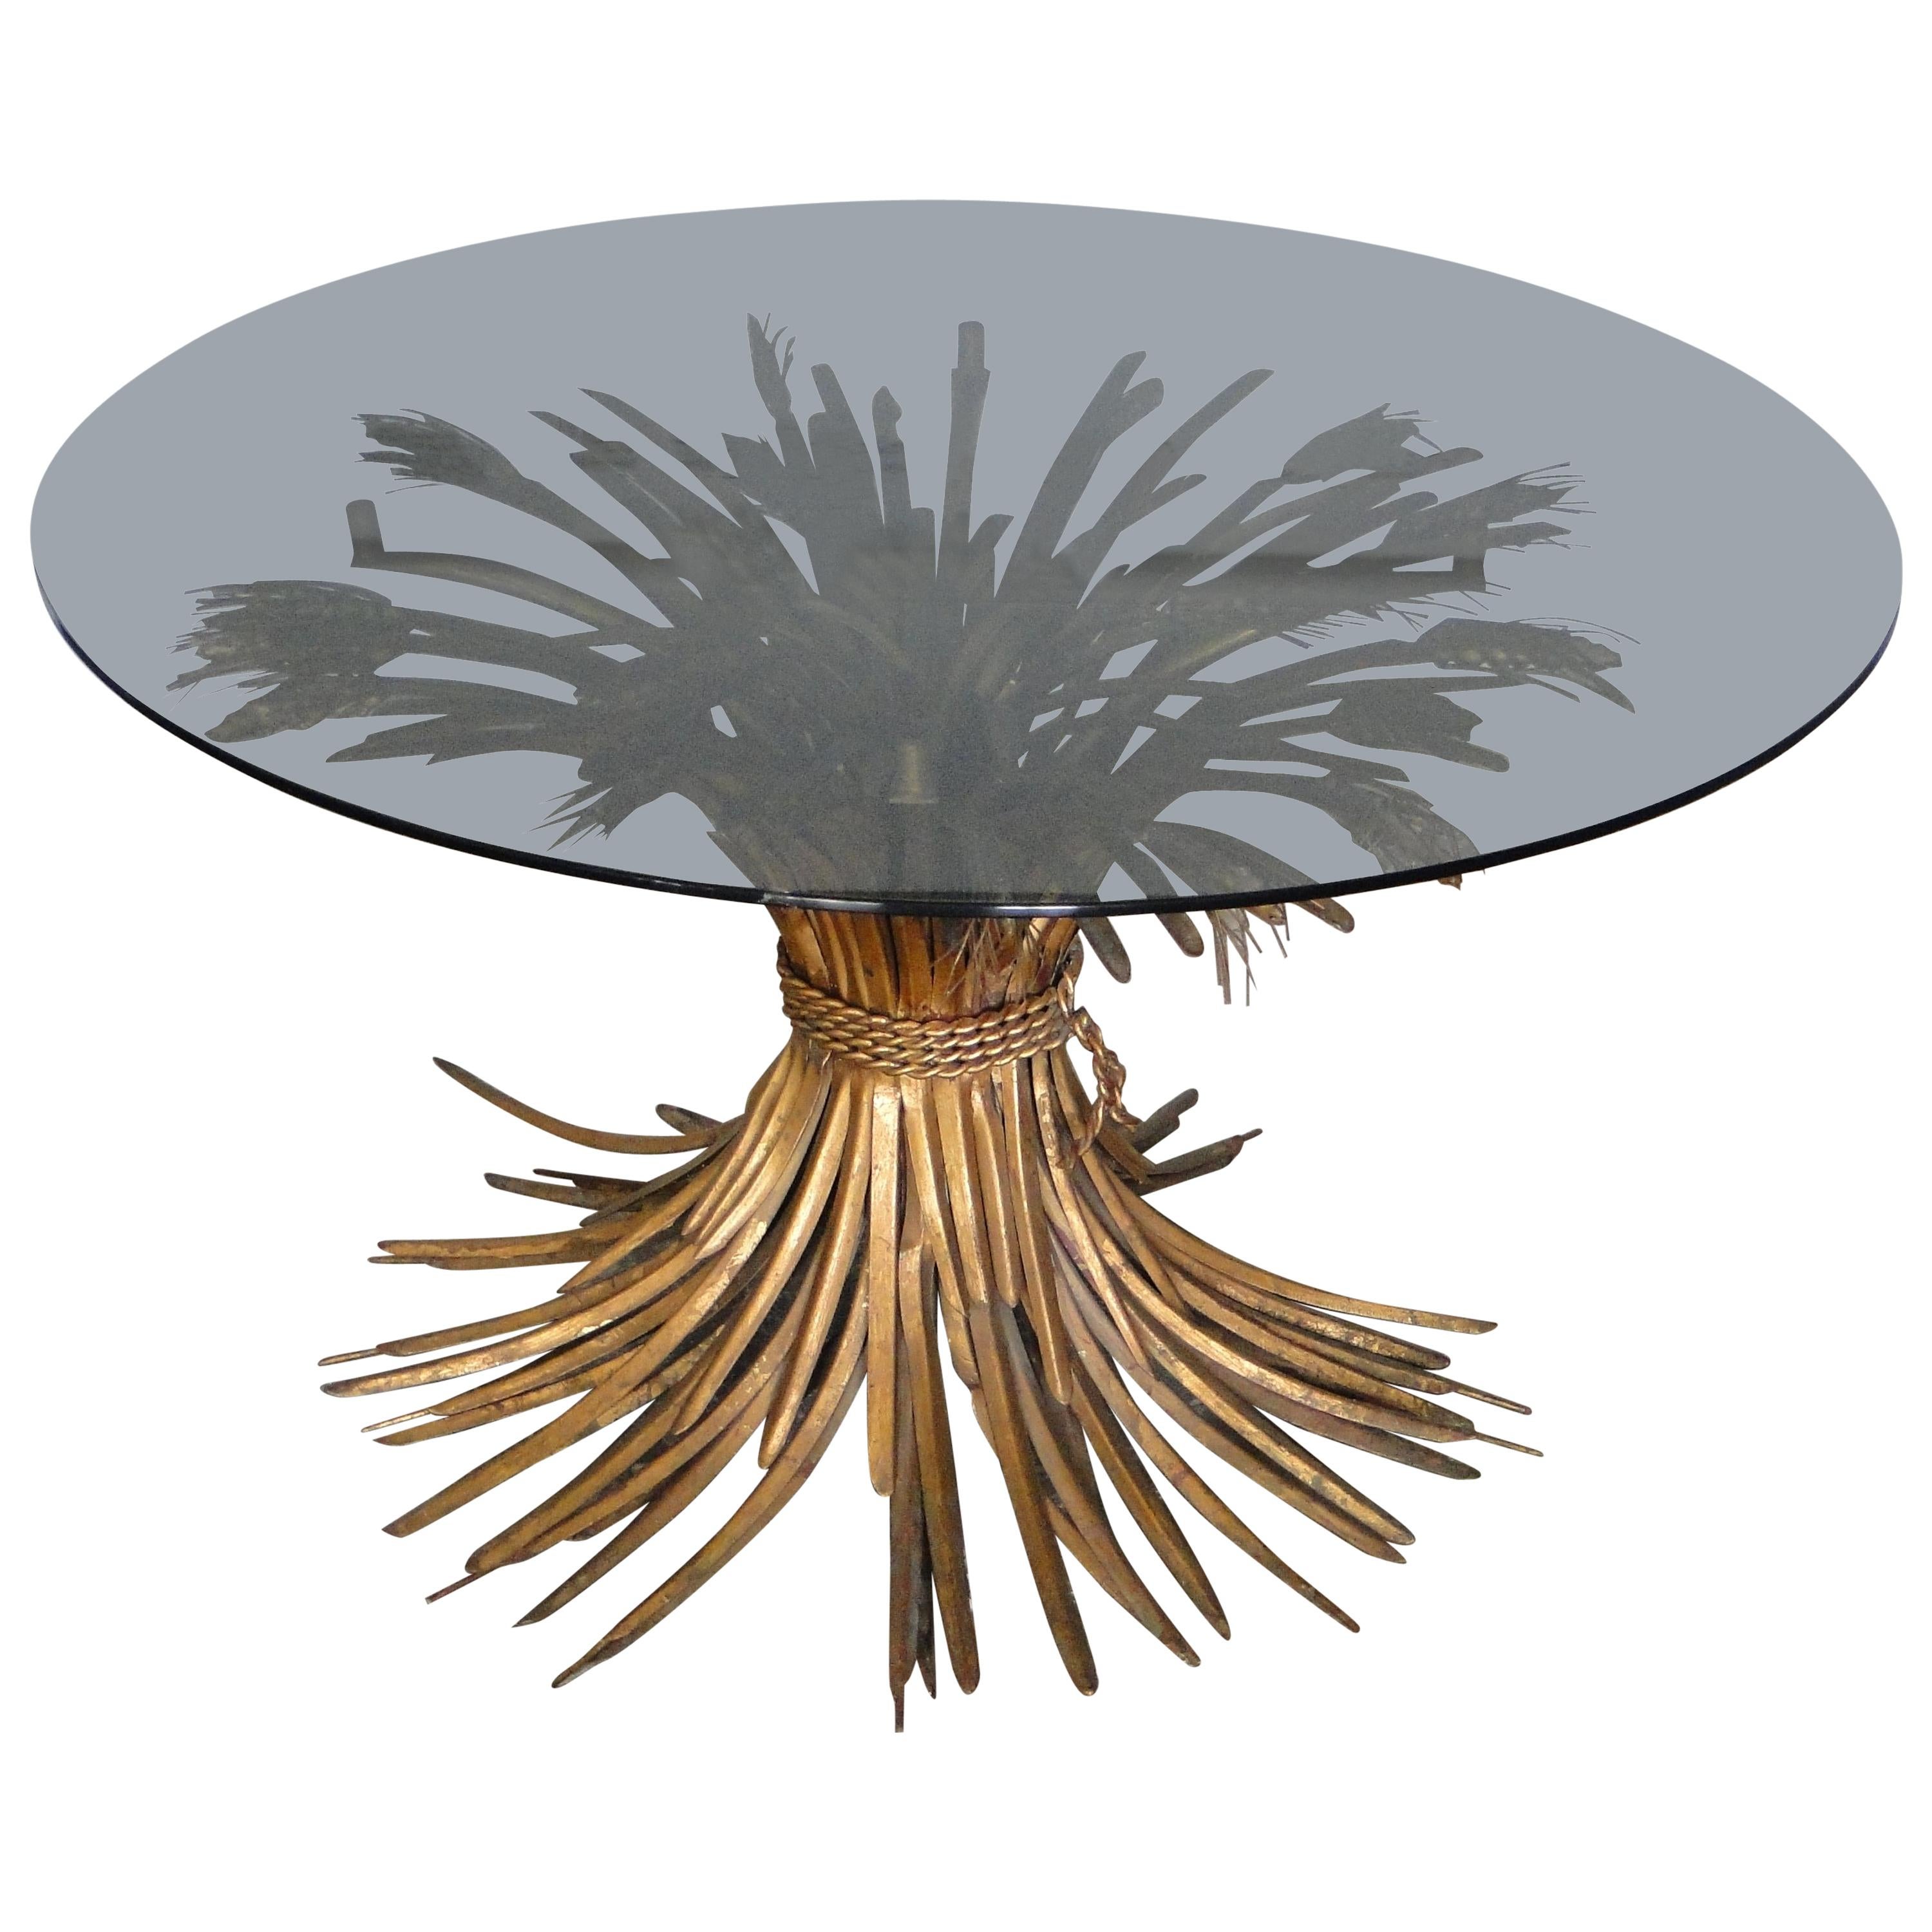 Sheaf of Wheat Sofa Table Coco Chanel Robert Goossens For Sale